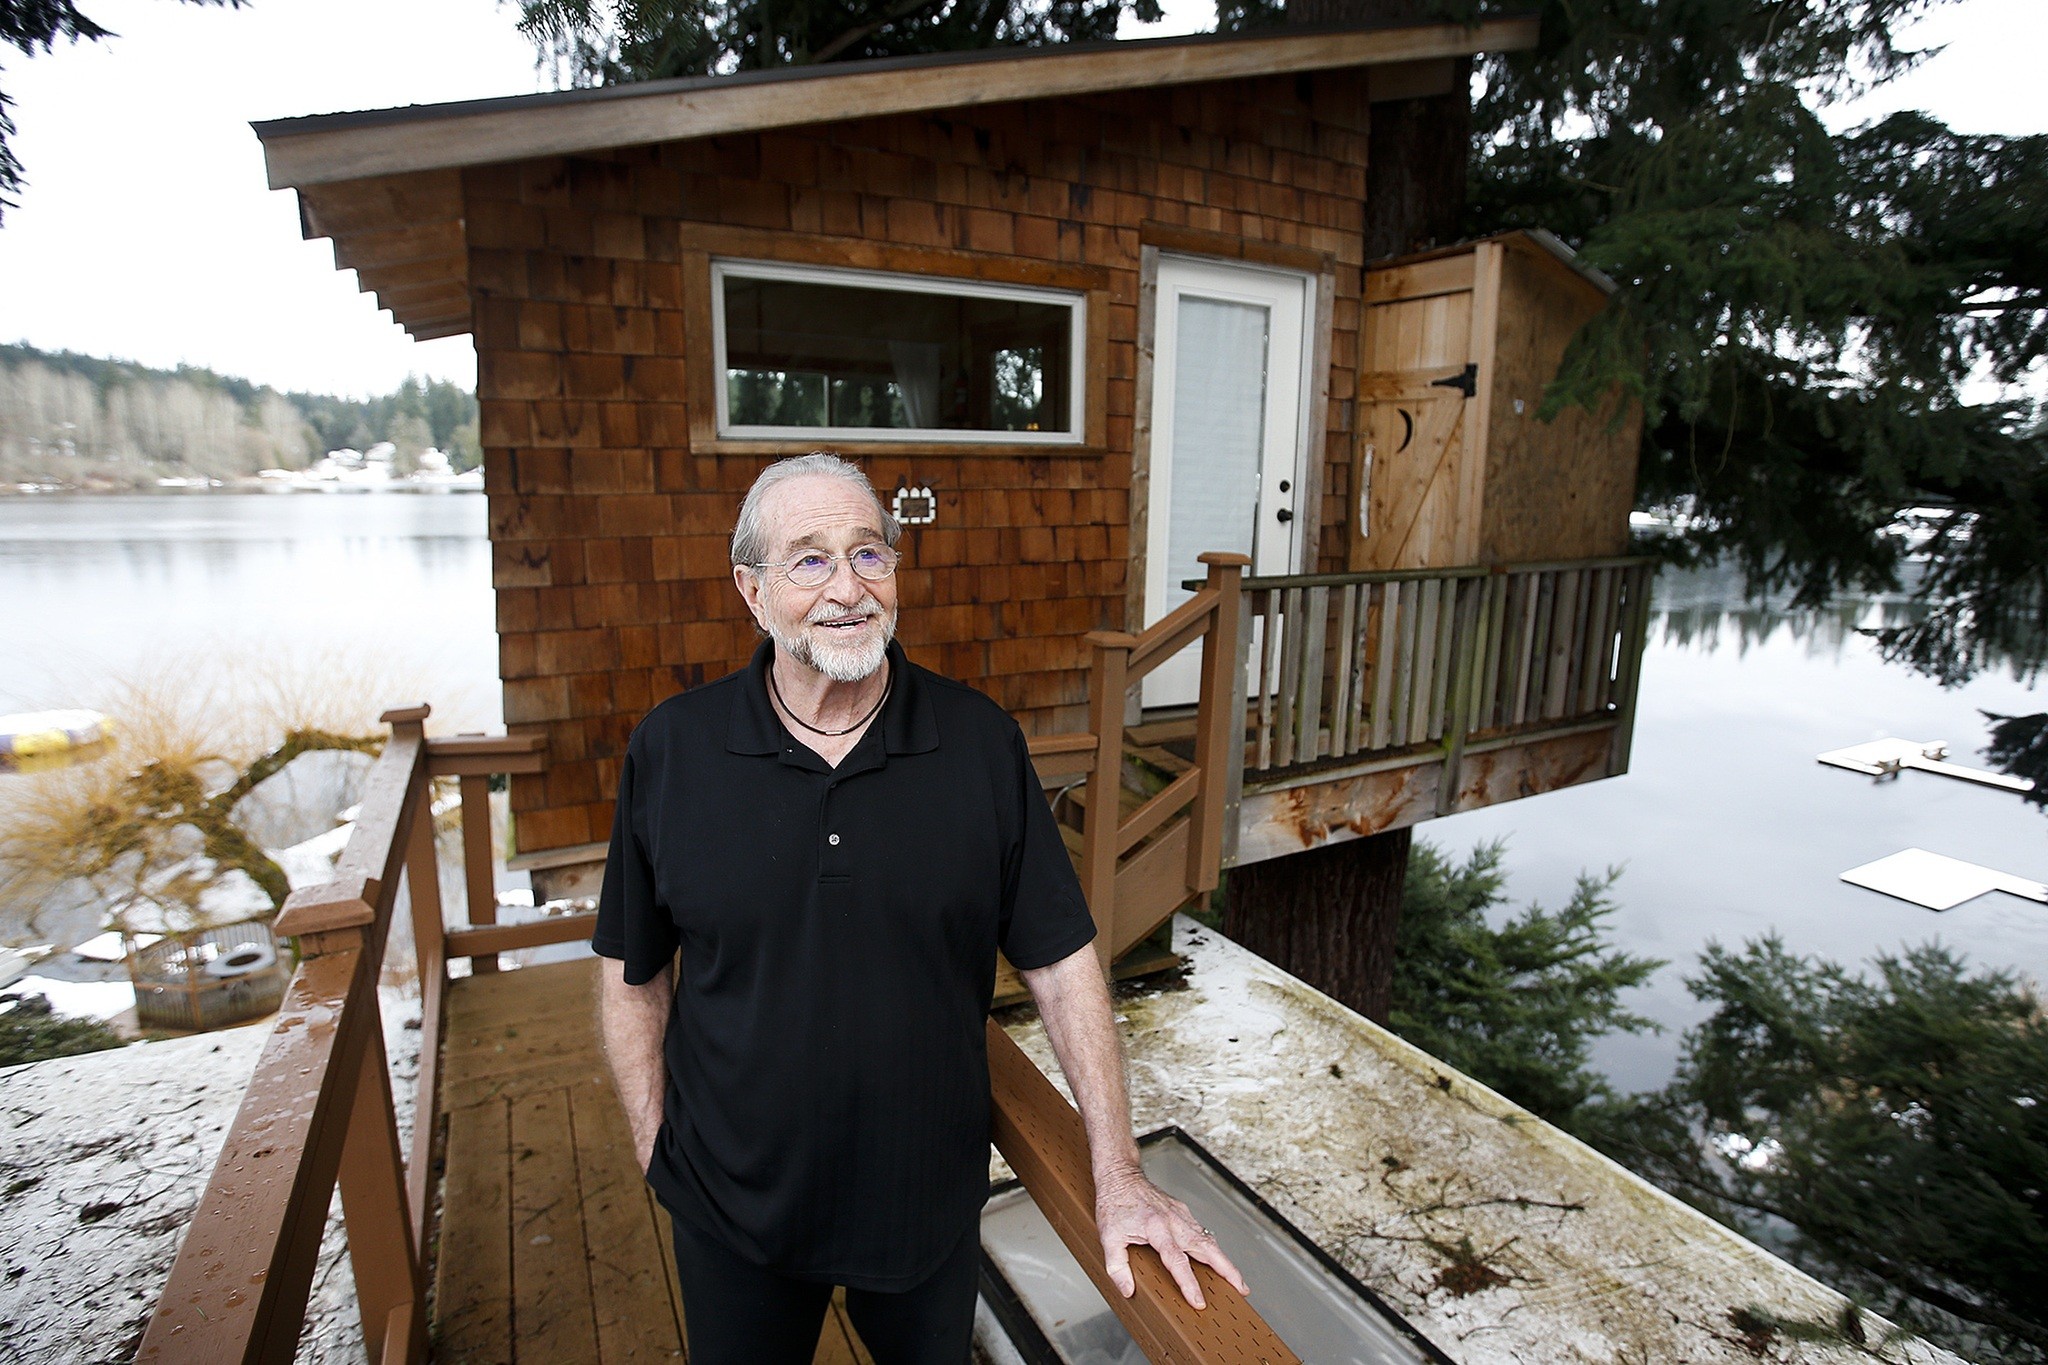 John Shephard enlisted the help of Pete Nelson, a treehouse builder featured on Animal Planet’s “Treehouse Masters” television show, to construct the treehouse he now leases as bed and breakfast on Cottage Lake near Woodinville. (Ian Terry / The Herald)